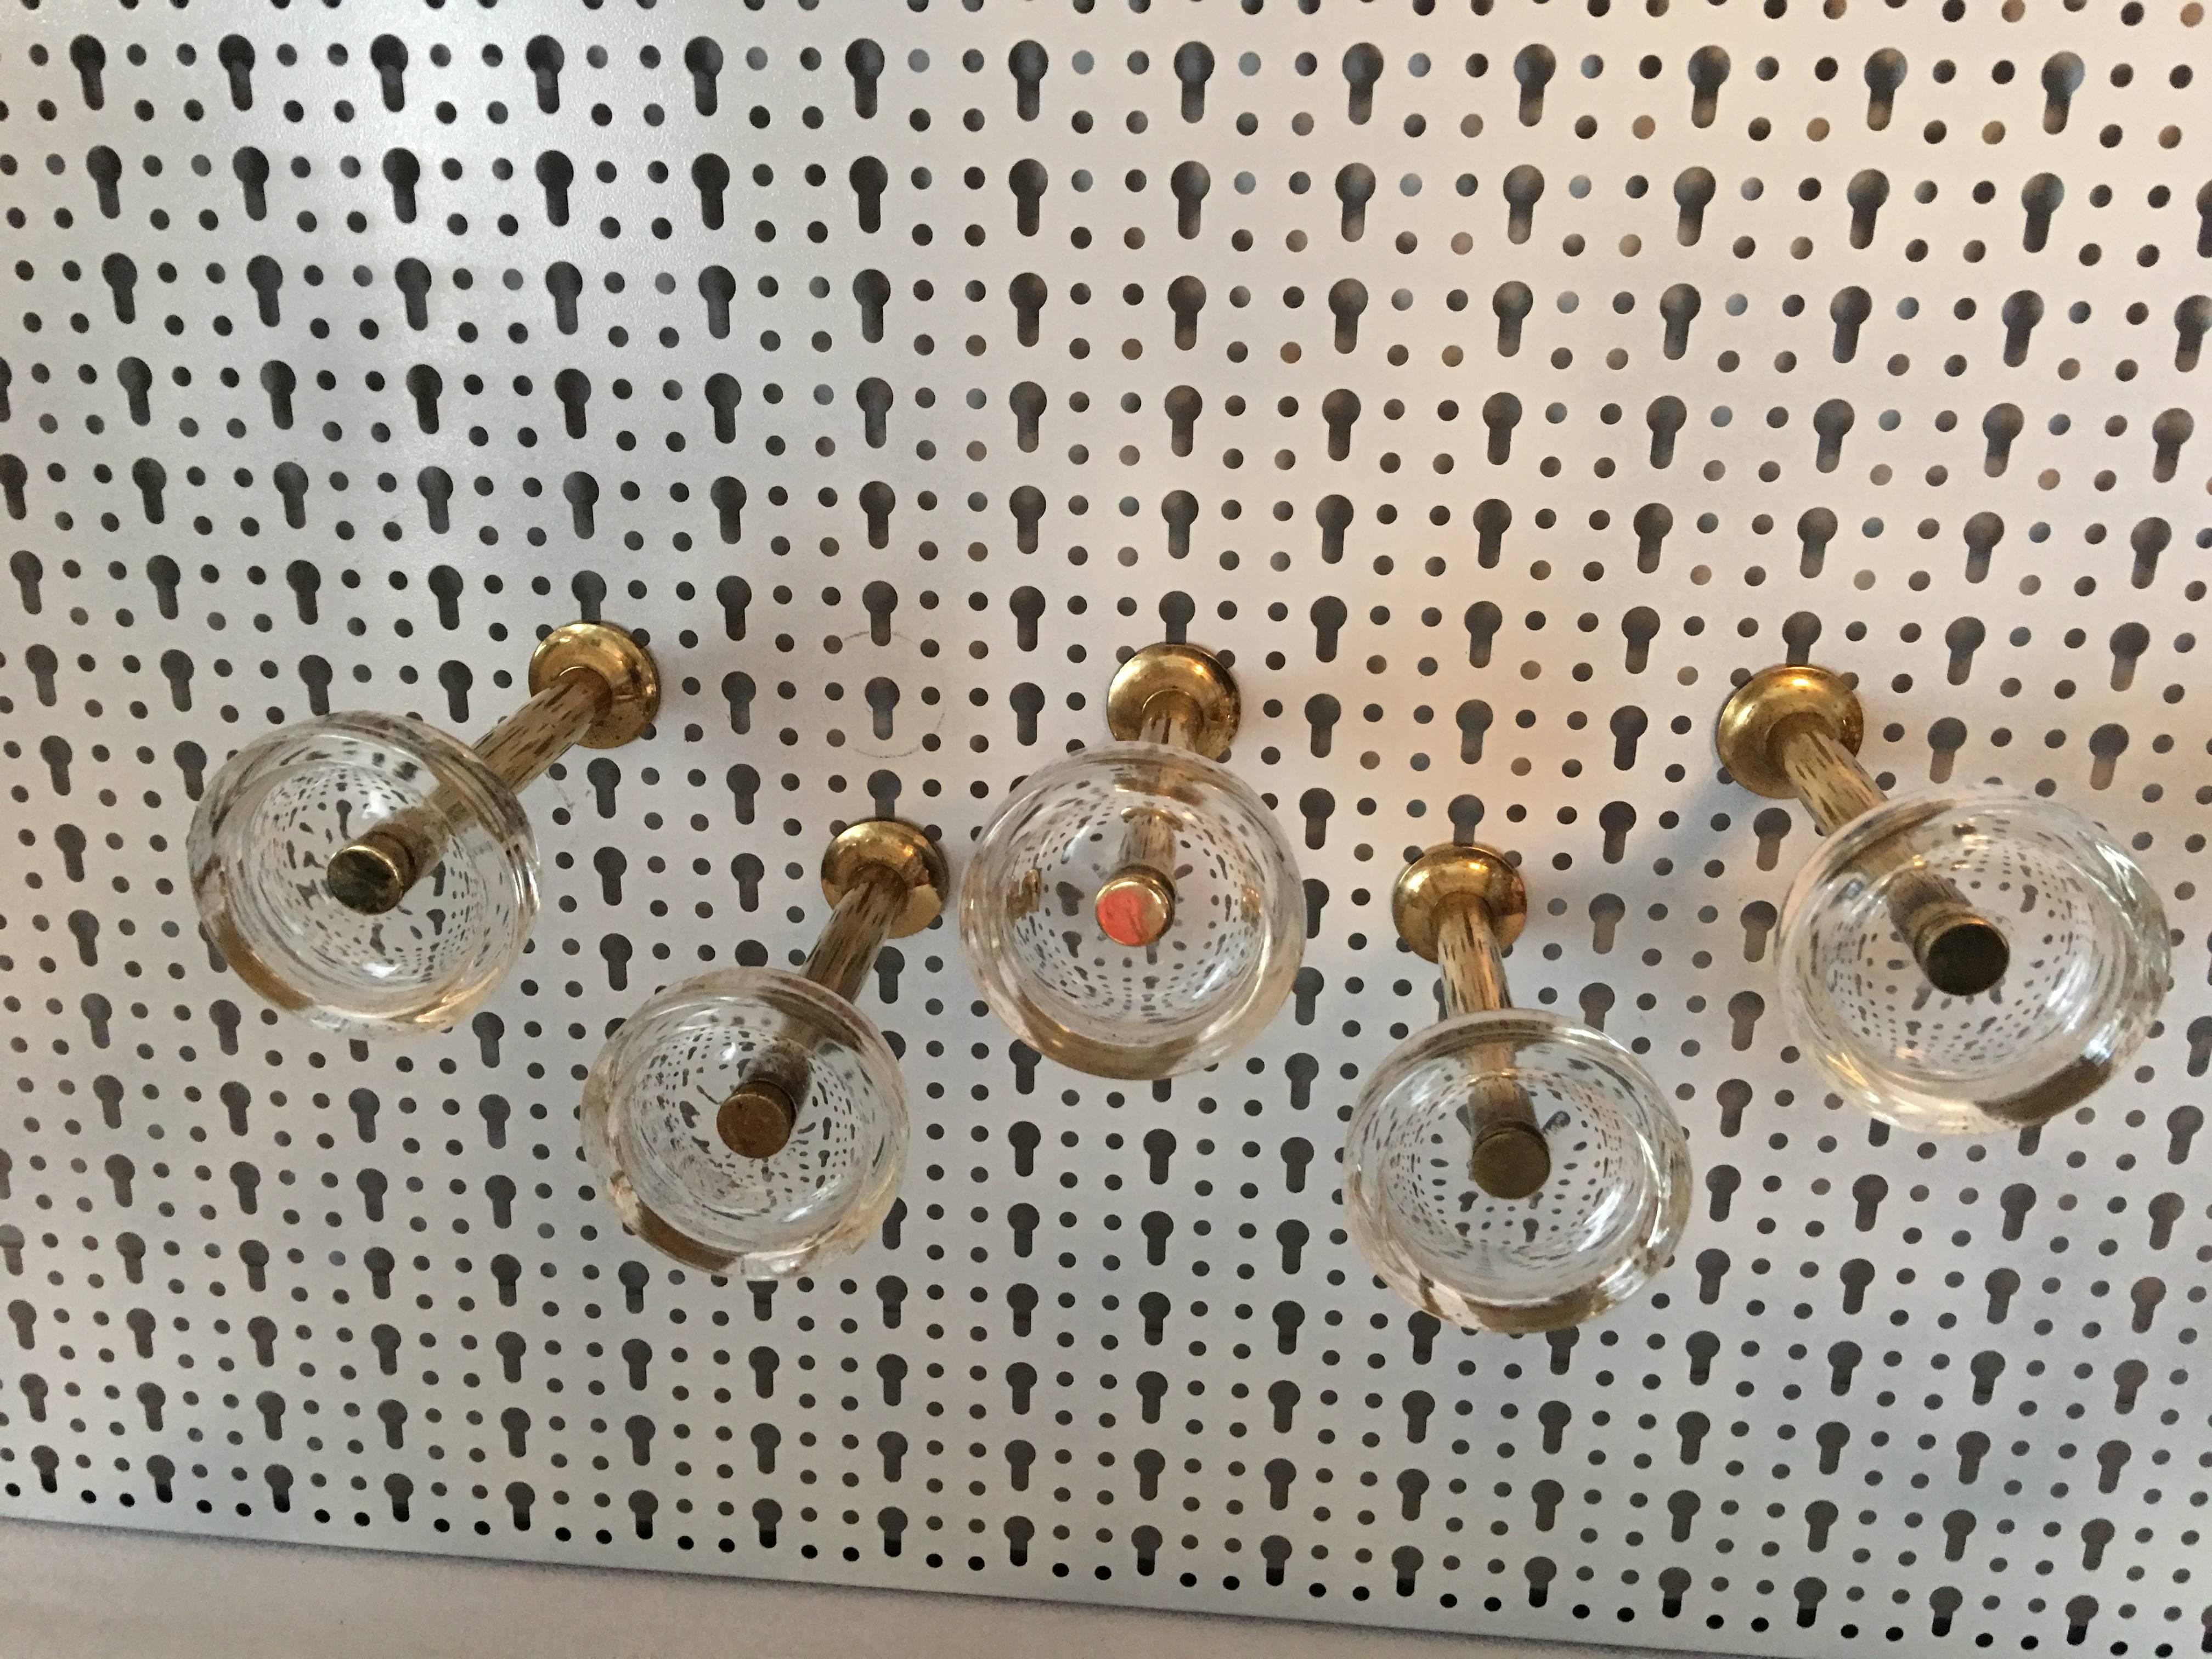 Five brass and glass wall hooks. 1970s, Italy. A very unique set of decorative hooks. A real eyecatcher.